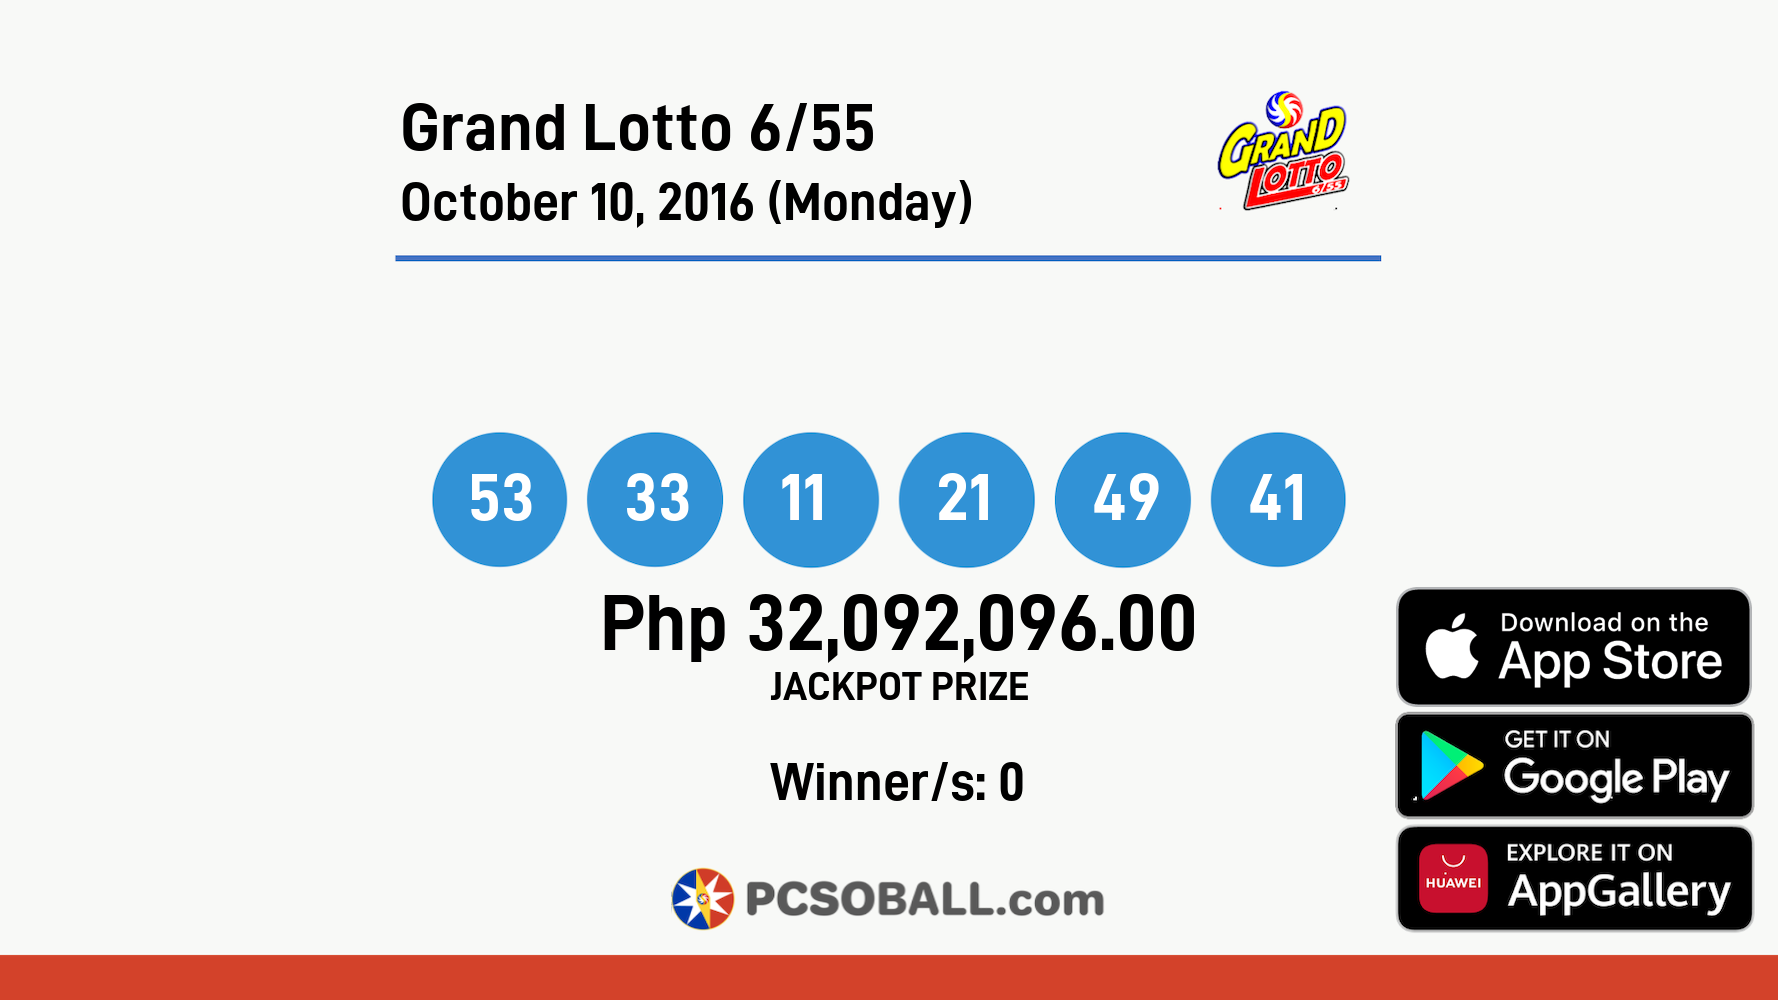 Grand Lotto 6/55 October 10, 2016 (Monday) Result